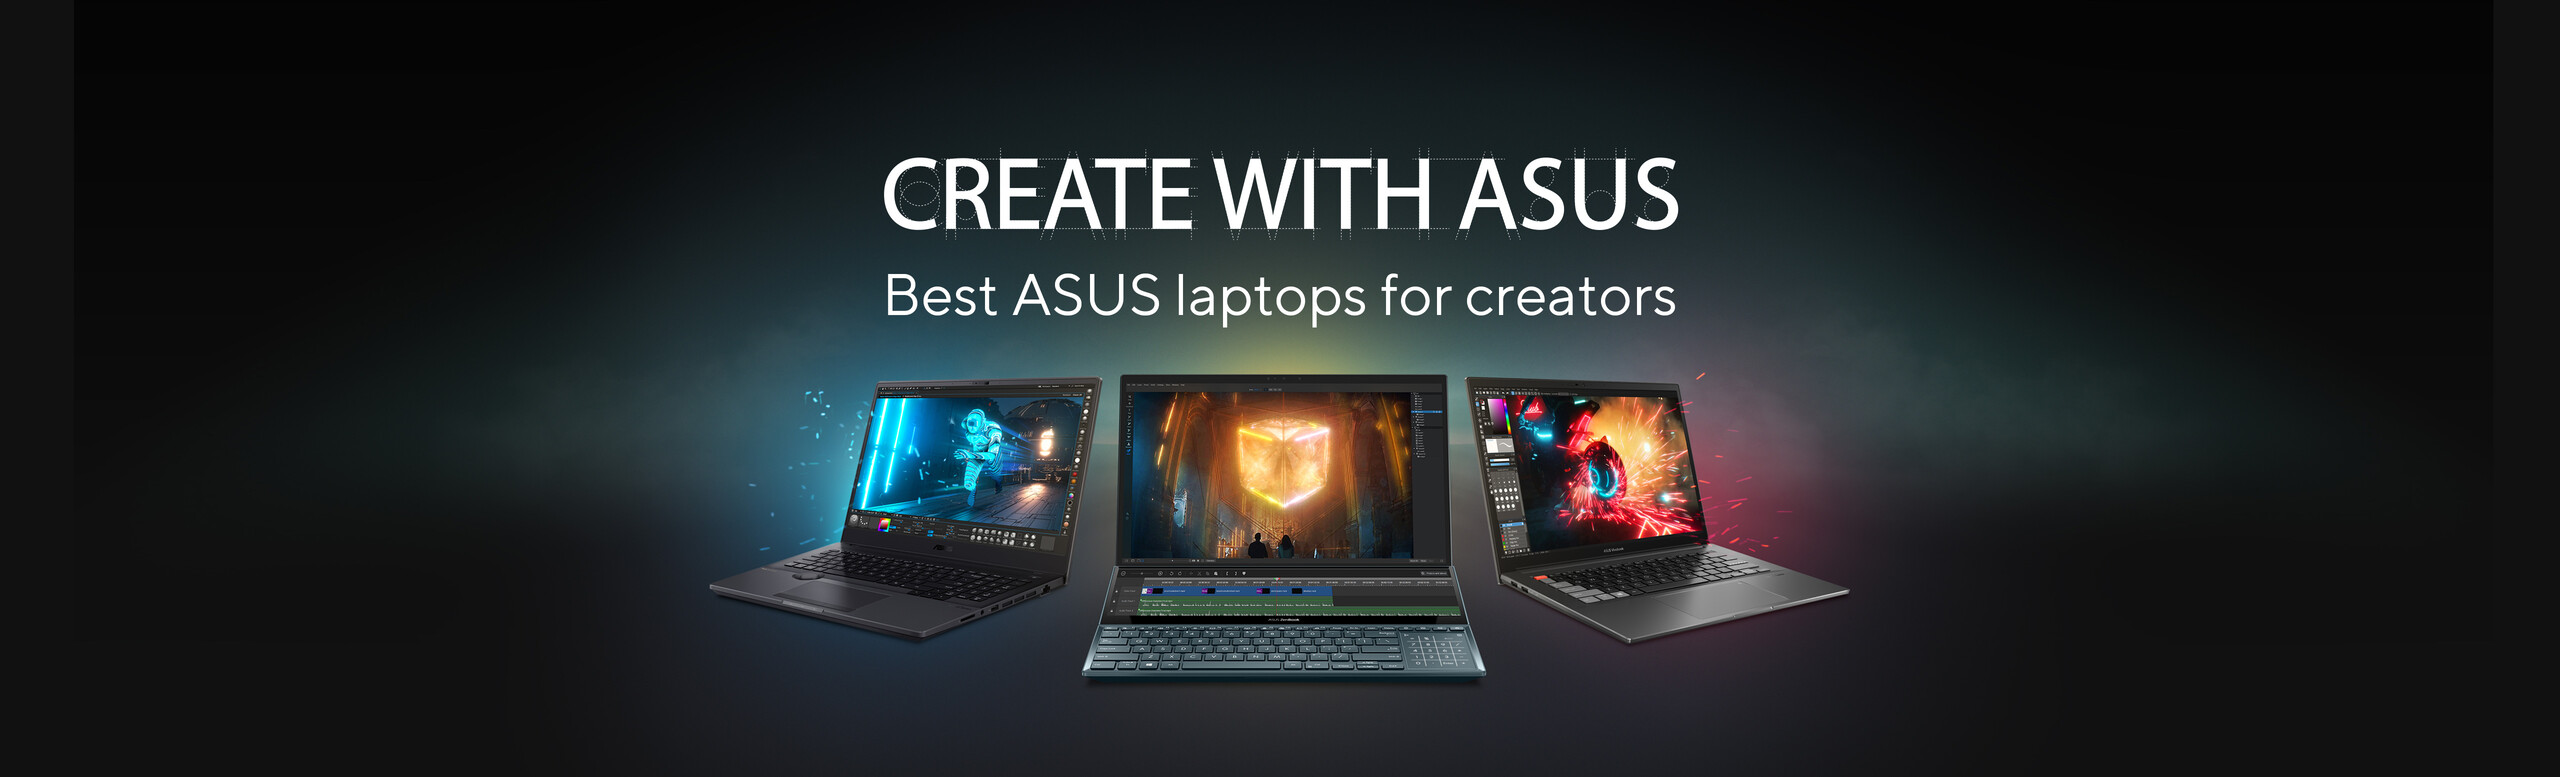 Create with ASUS